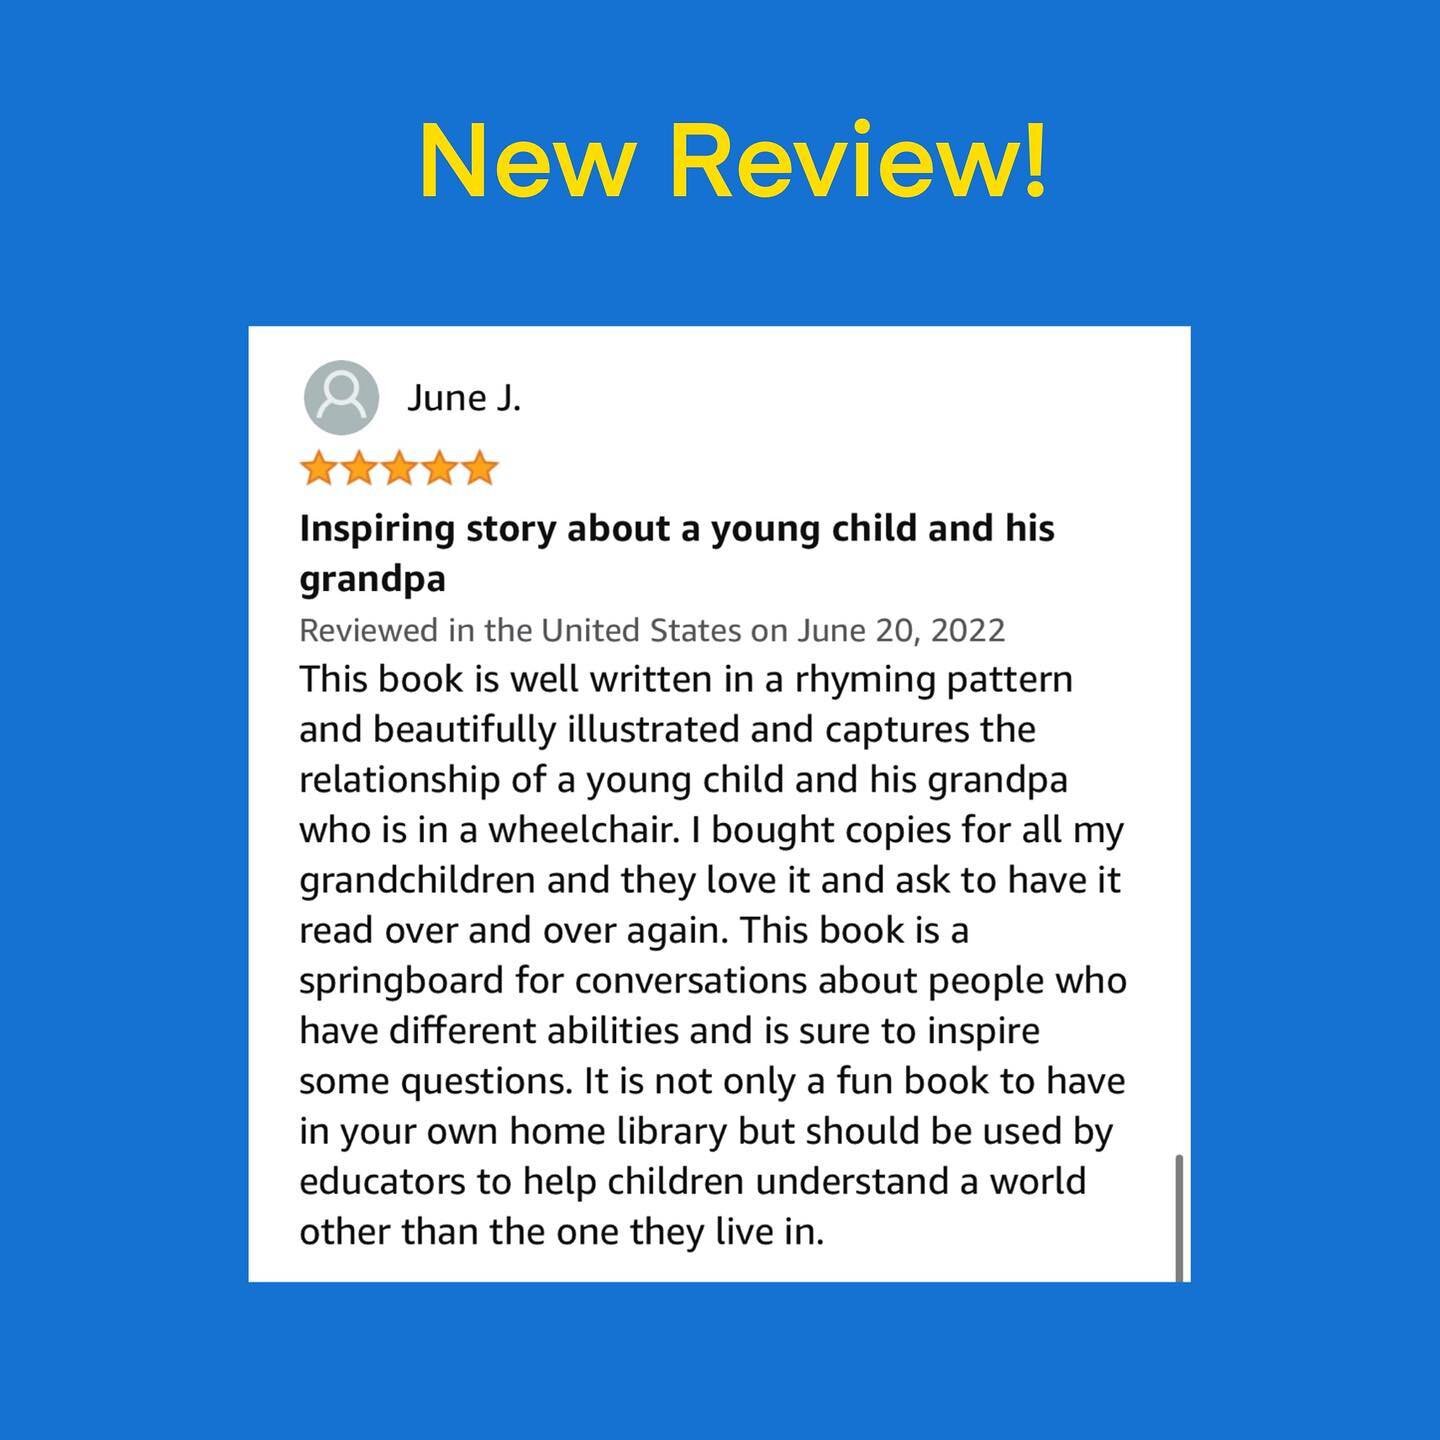 Thank you June for the beautiful review and for sharing with all of your grandkids! We are so happy to be a part of their libraries! 💙💛❤️
.
.
.
.
.
.
#indieauthor #publishing #selfpublish #author #illustrator #childrensbook #education #teaching #le